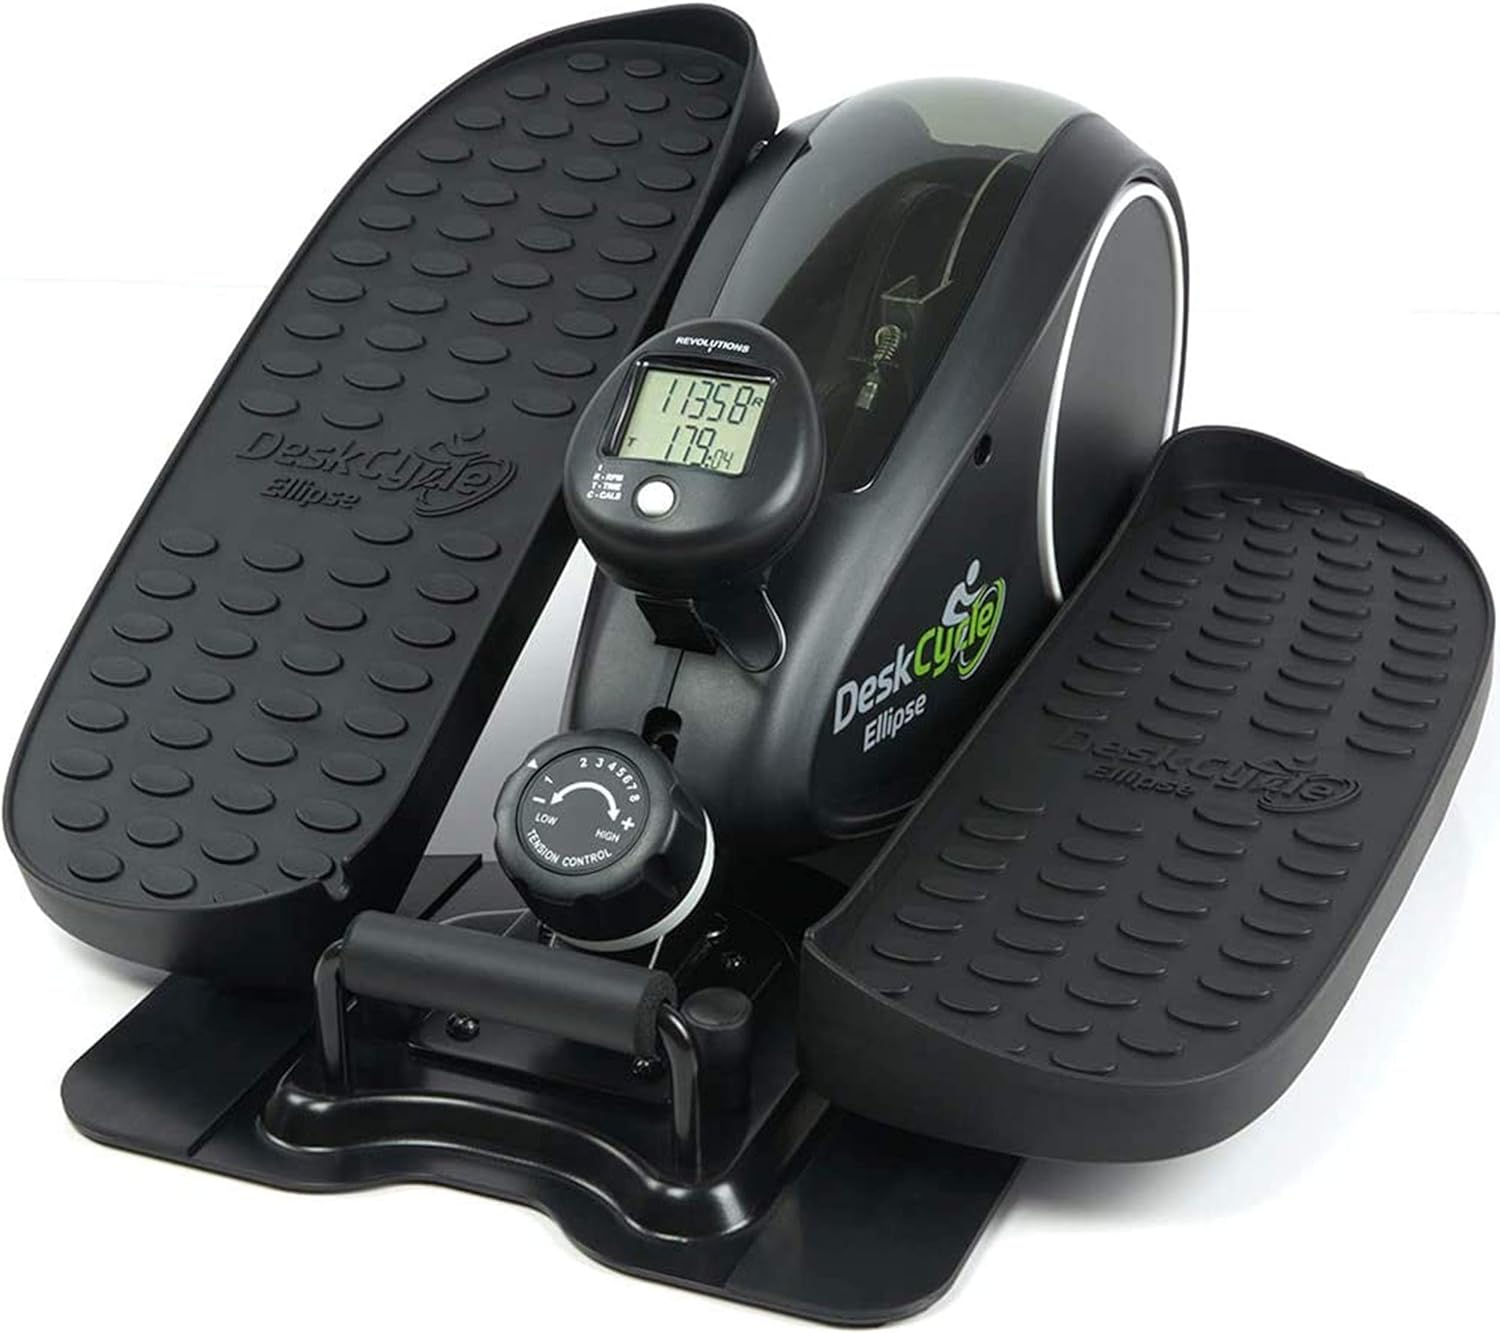 Under Desk Elliptical Machine - Get Fit While You Work with Our Compact Mini Seated Elliptical Machine